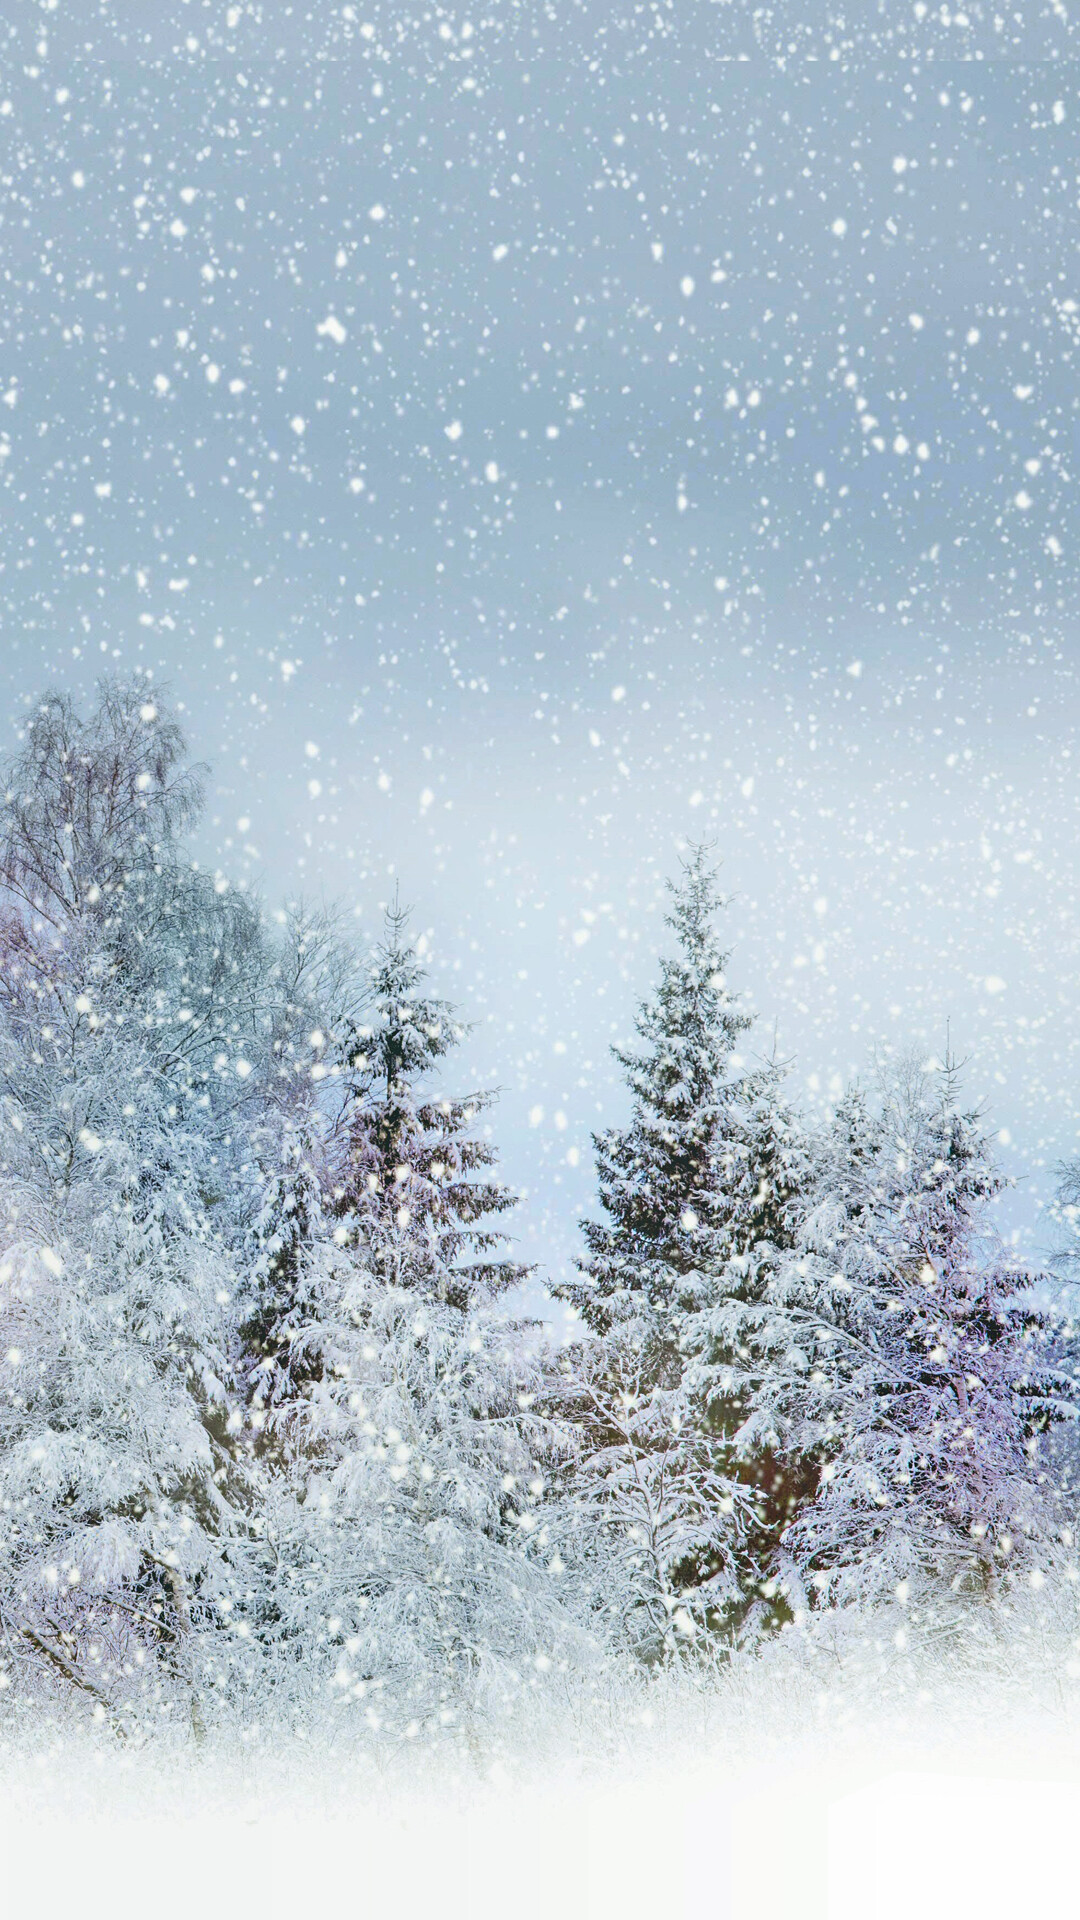 Snowfall: Providing an insulating layer during winter under which plants and animals are able to survive the cold. 1080x1920 Full HD Background.